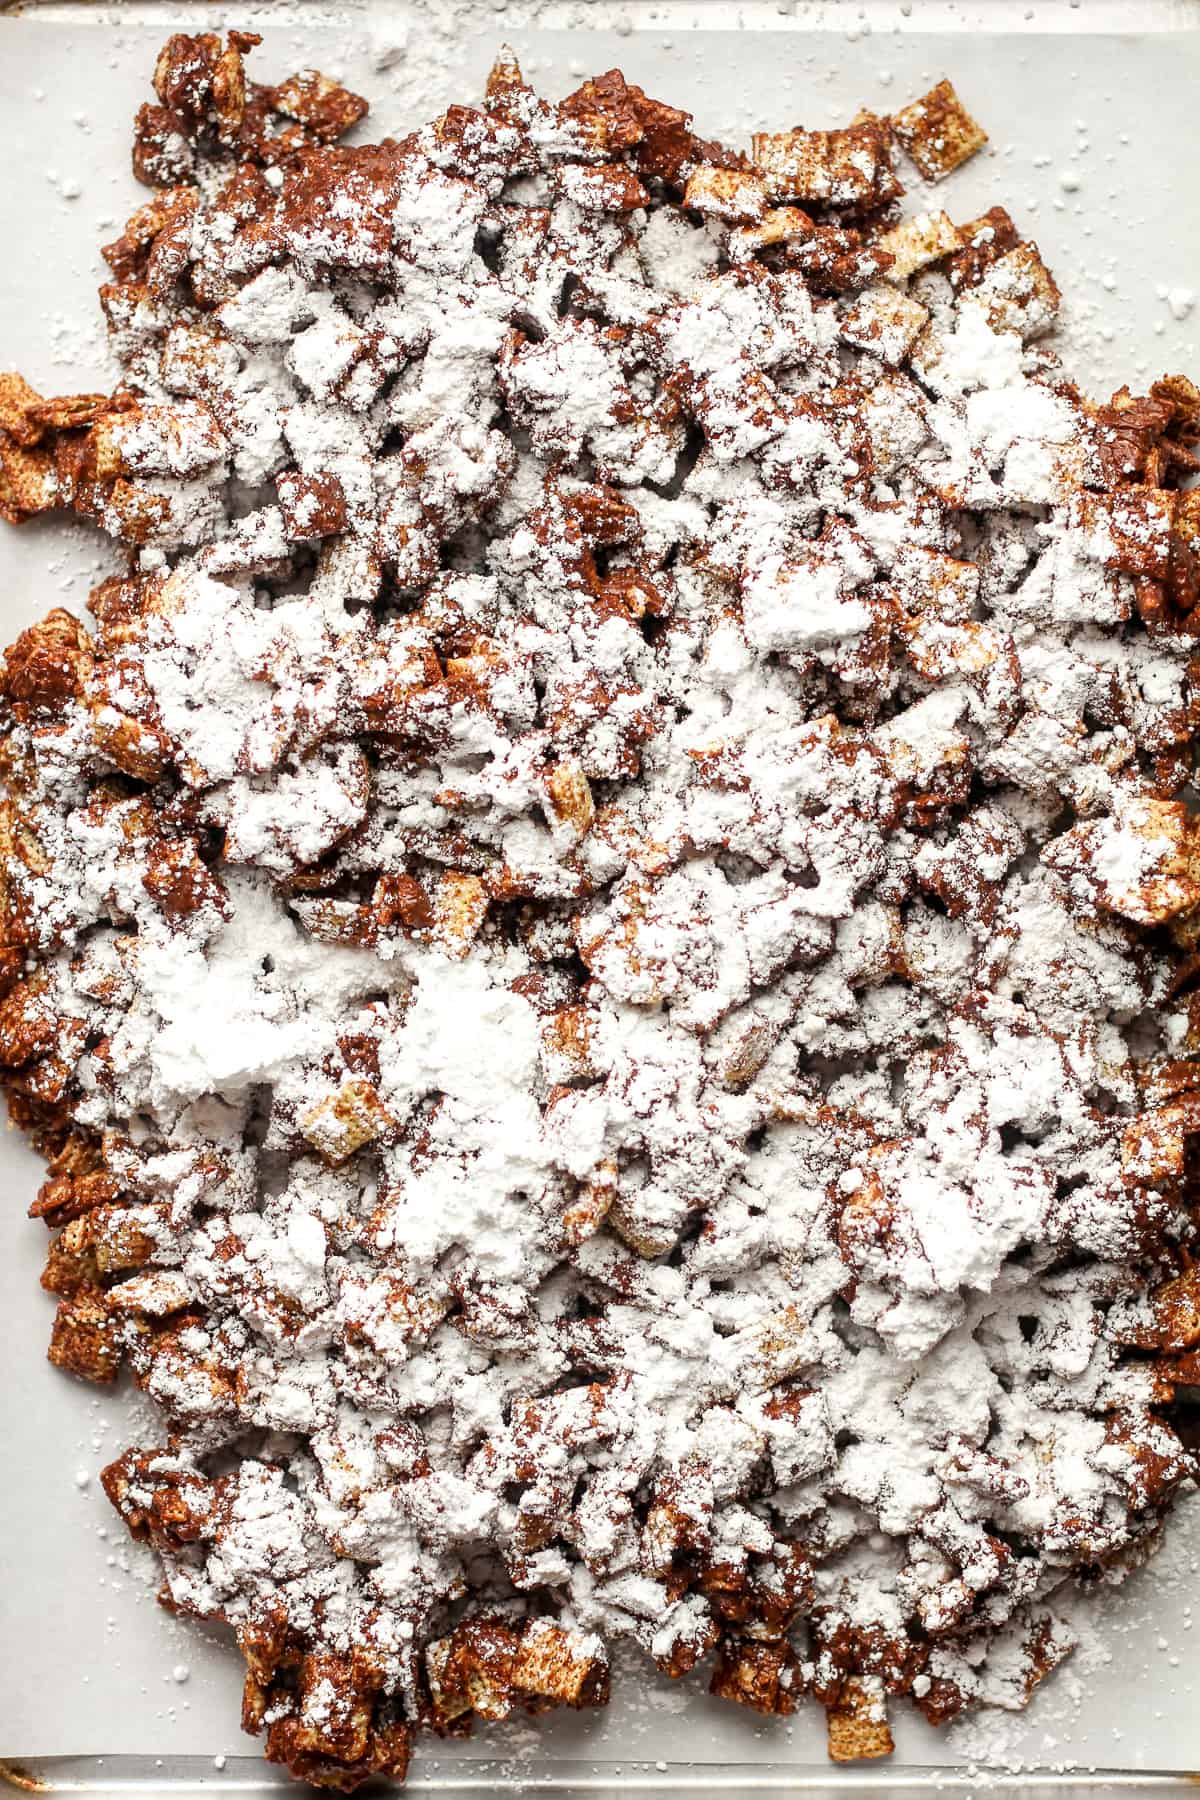 A sheet pan of the Chex mix with the powdered sugar sprinkled on top.